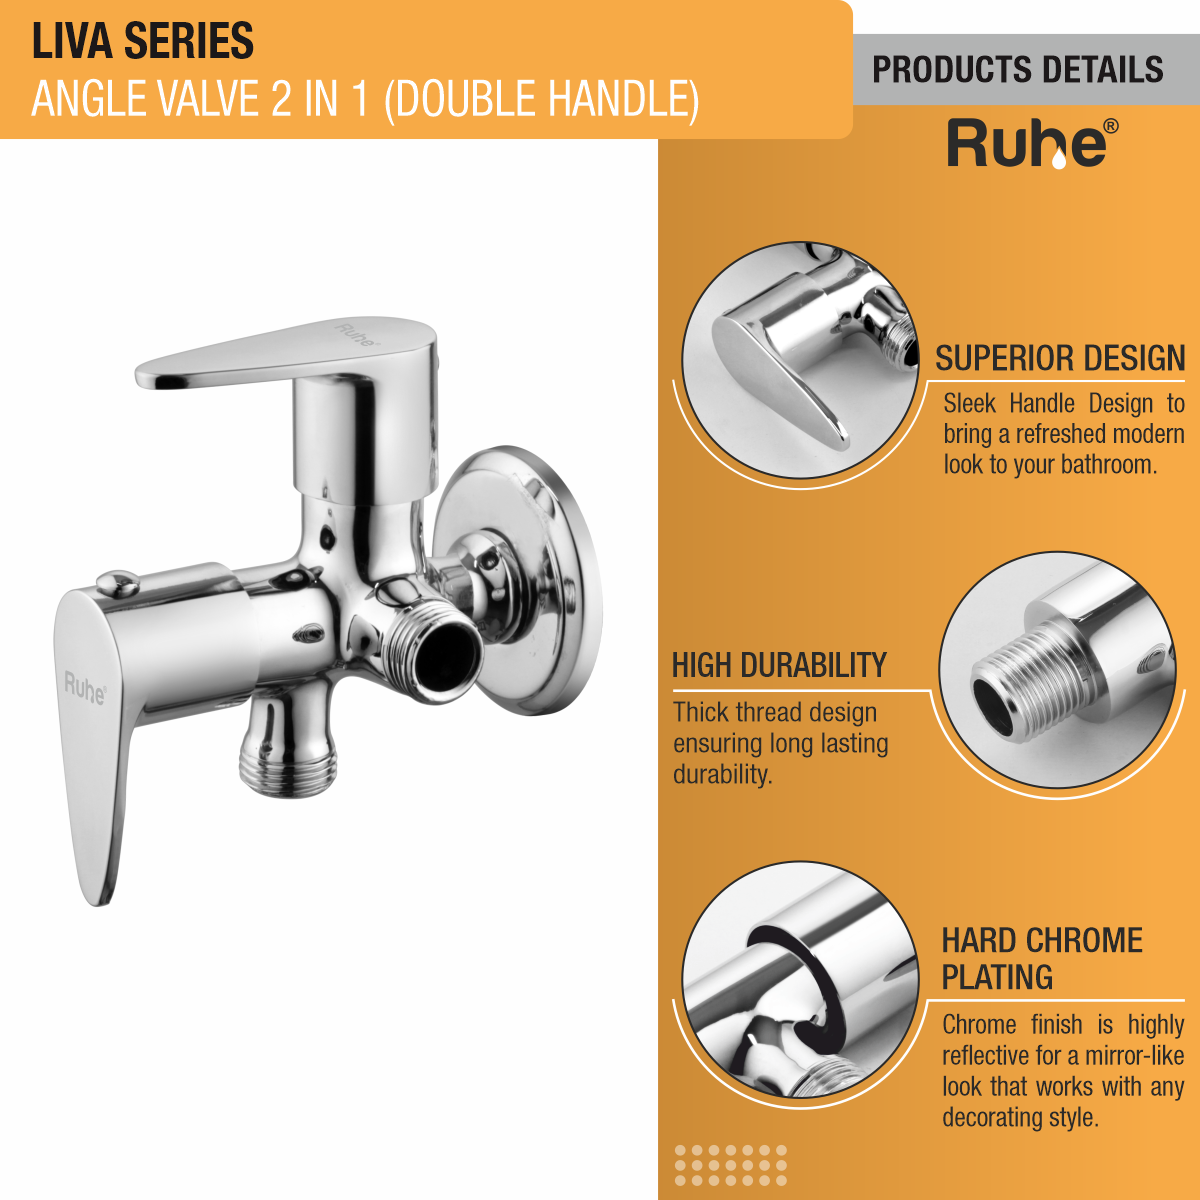 Liva Two Way Angle Valve Brass Faucet (Double Handle) product details